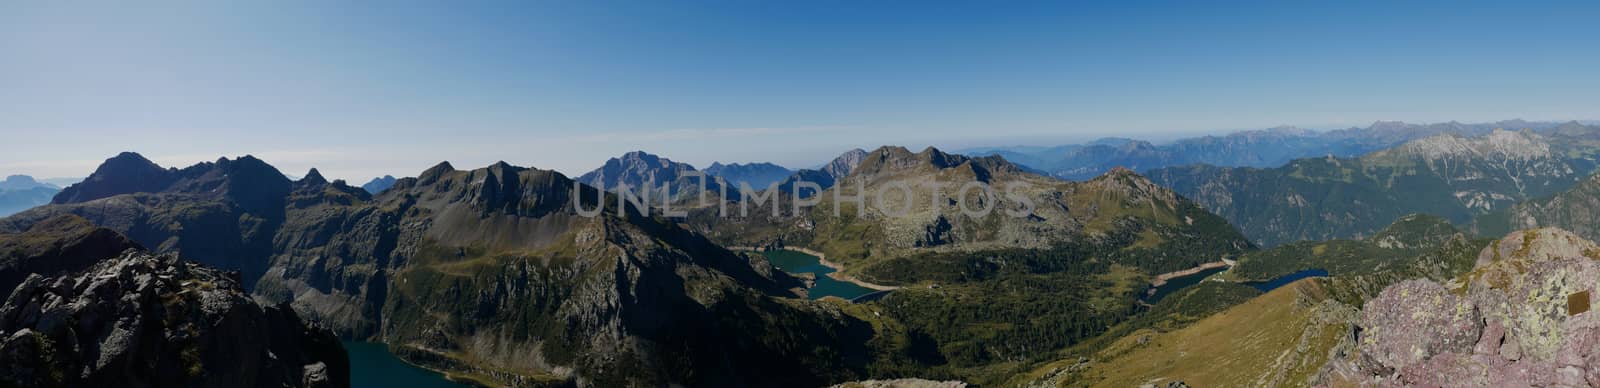 Panoramic view of lake Colombo basin and dam on the Bergamo Alps
 by gigidread